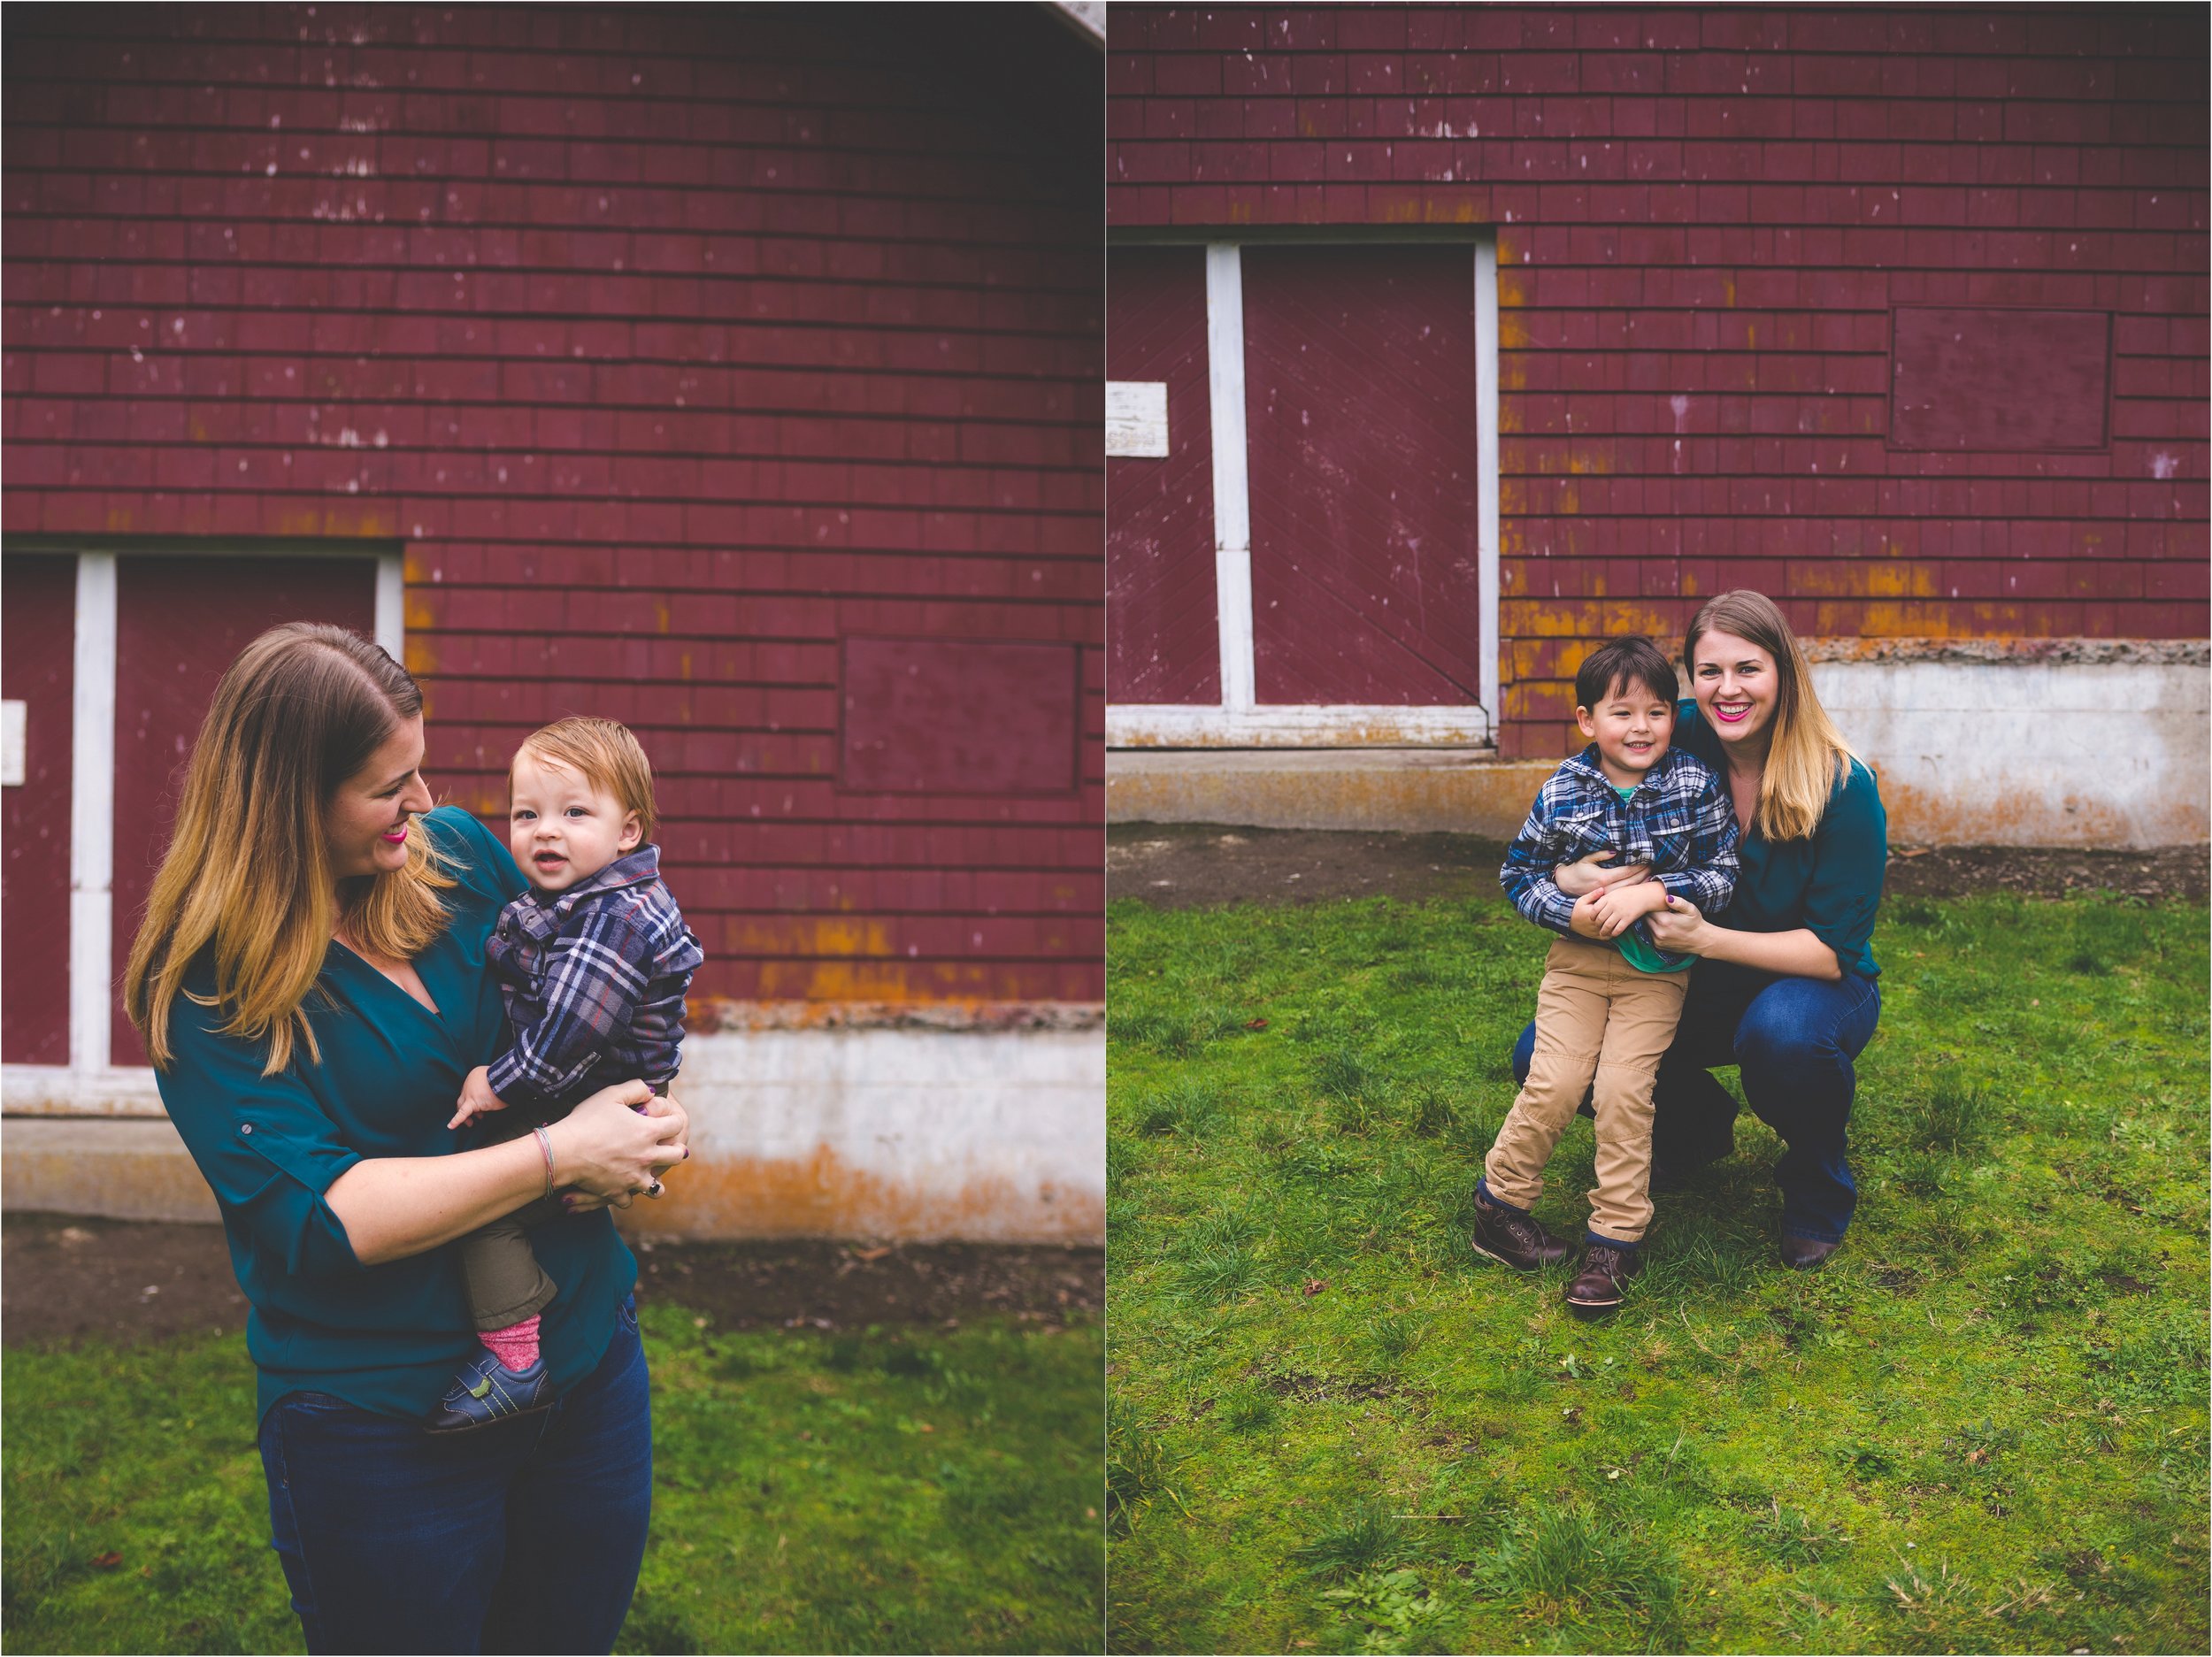 fort-steilacoom-park-family-session-jannicka-mayte-pacific-northwest-lifestyle-photographer_0015.jpg